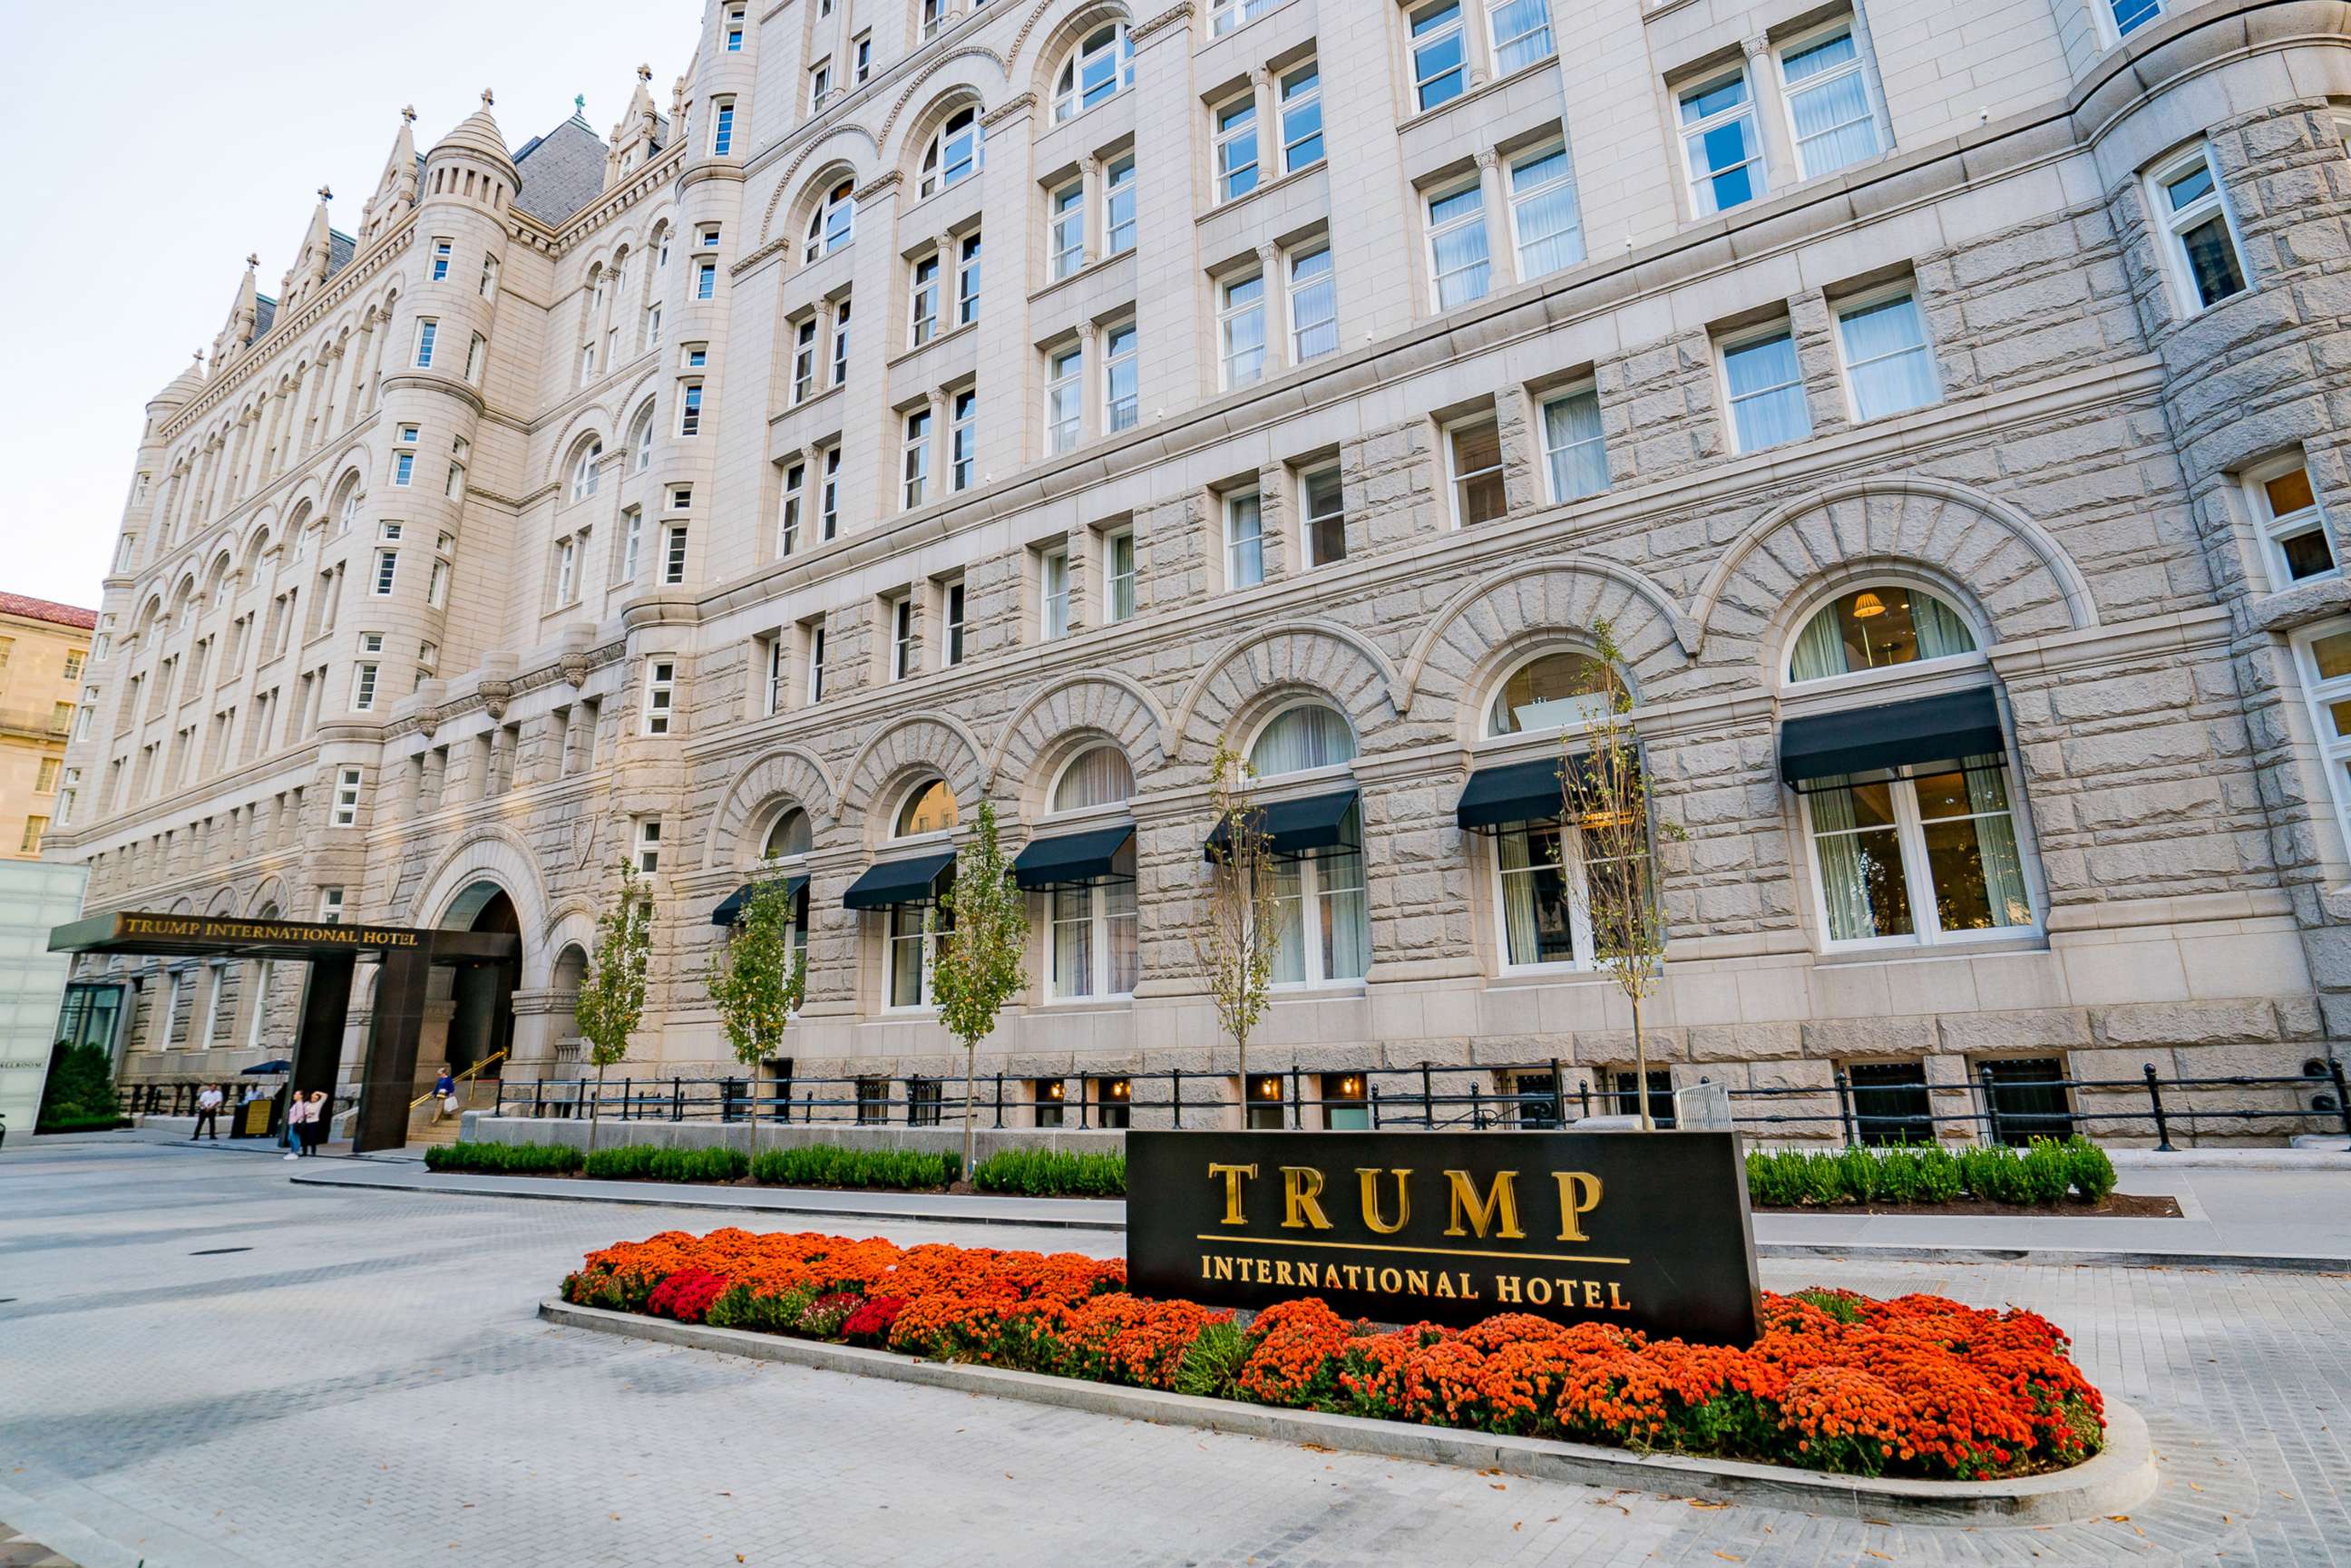 PHOTO: A general view of the Trump International Hotel in Washington, D.C. on Oct. 30, 2016.